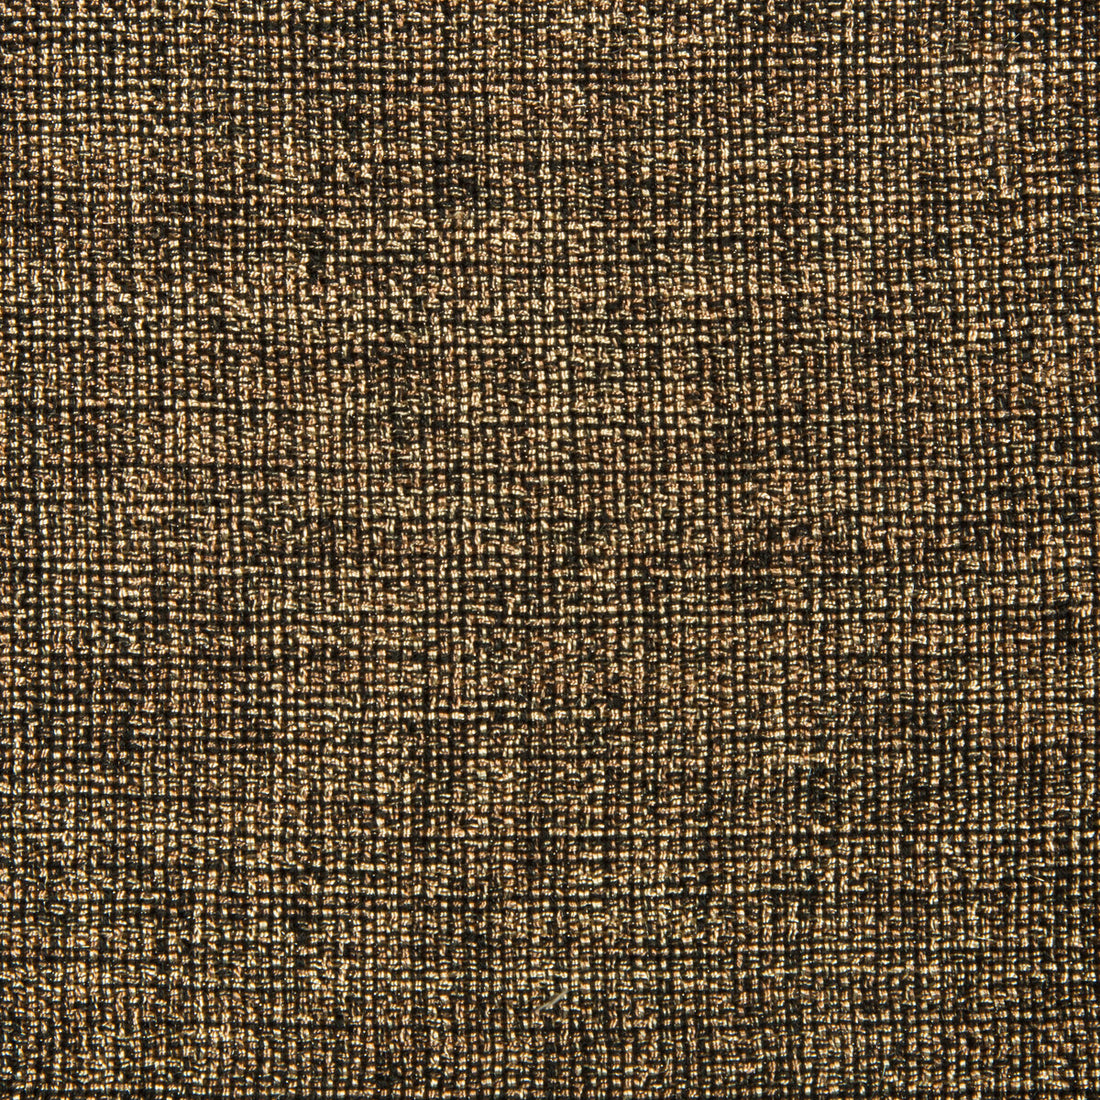 Kravet Contract fabric in 4458-814 color - pattern 4458.814.0 - by Kravet Contract